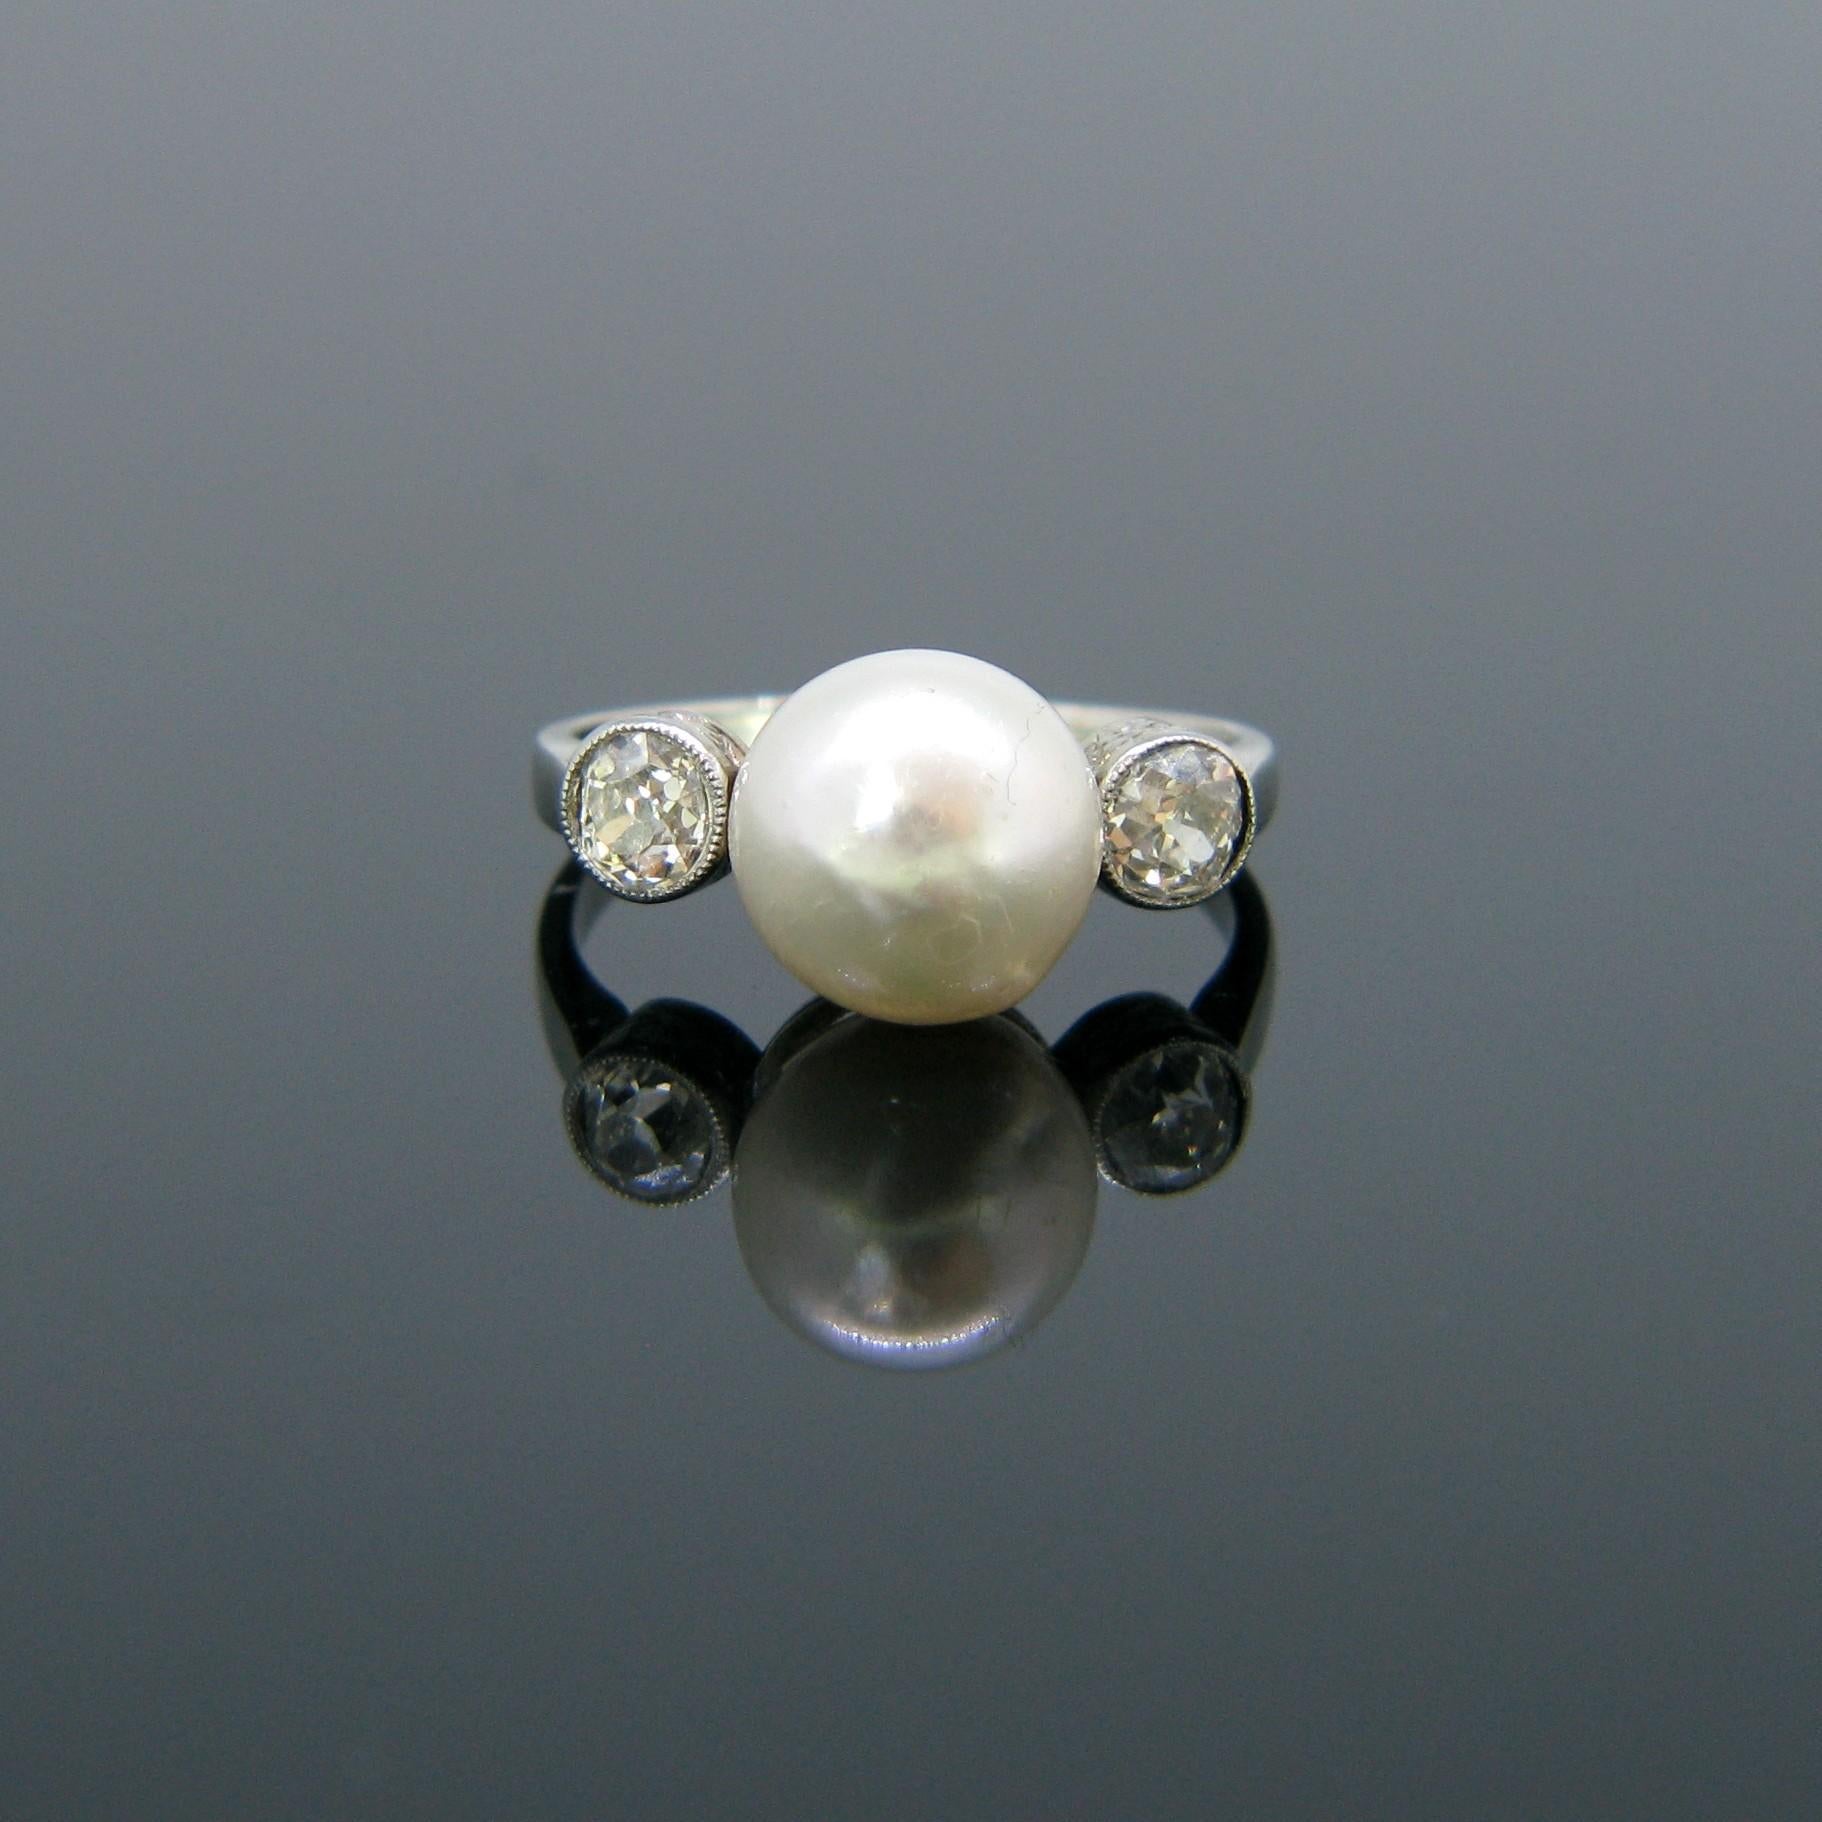 Weight: 	4.1gr

Metal:	Platinum
	18kt White Gold

Condition:	Very Good

Stones:		1 Cultured Pearl
•	Diameter:	8.60mm / 0.38in

Other Stones:		2 Diamonds
•	Cut:	Old Mine Cut
•	Total Carat Weight: 0.50ct approx.